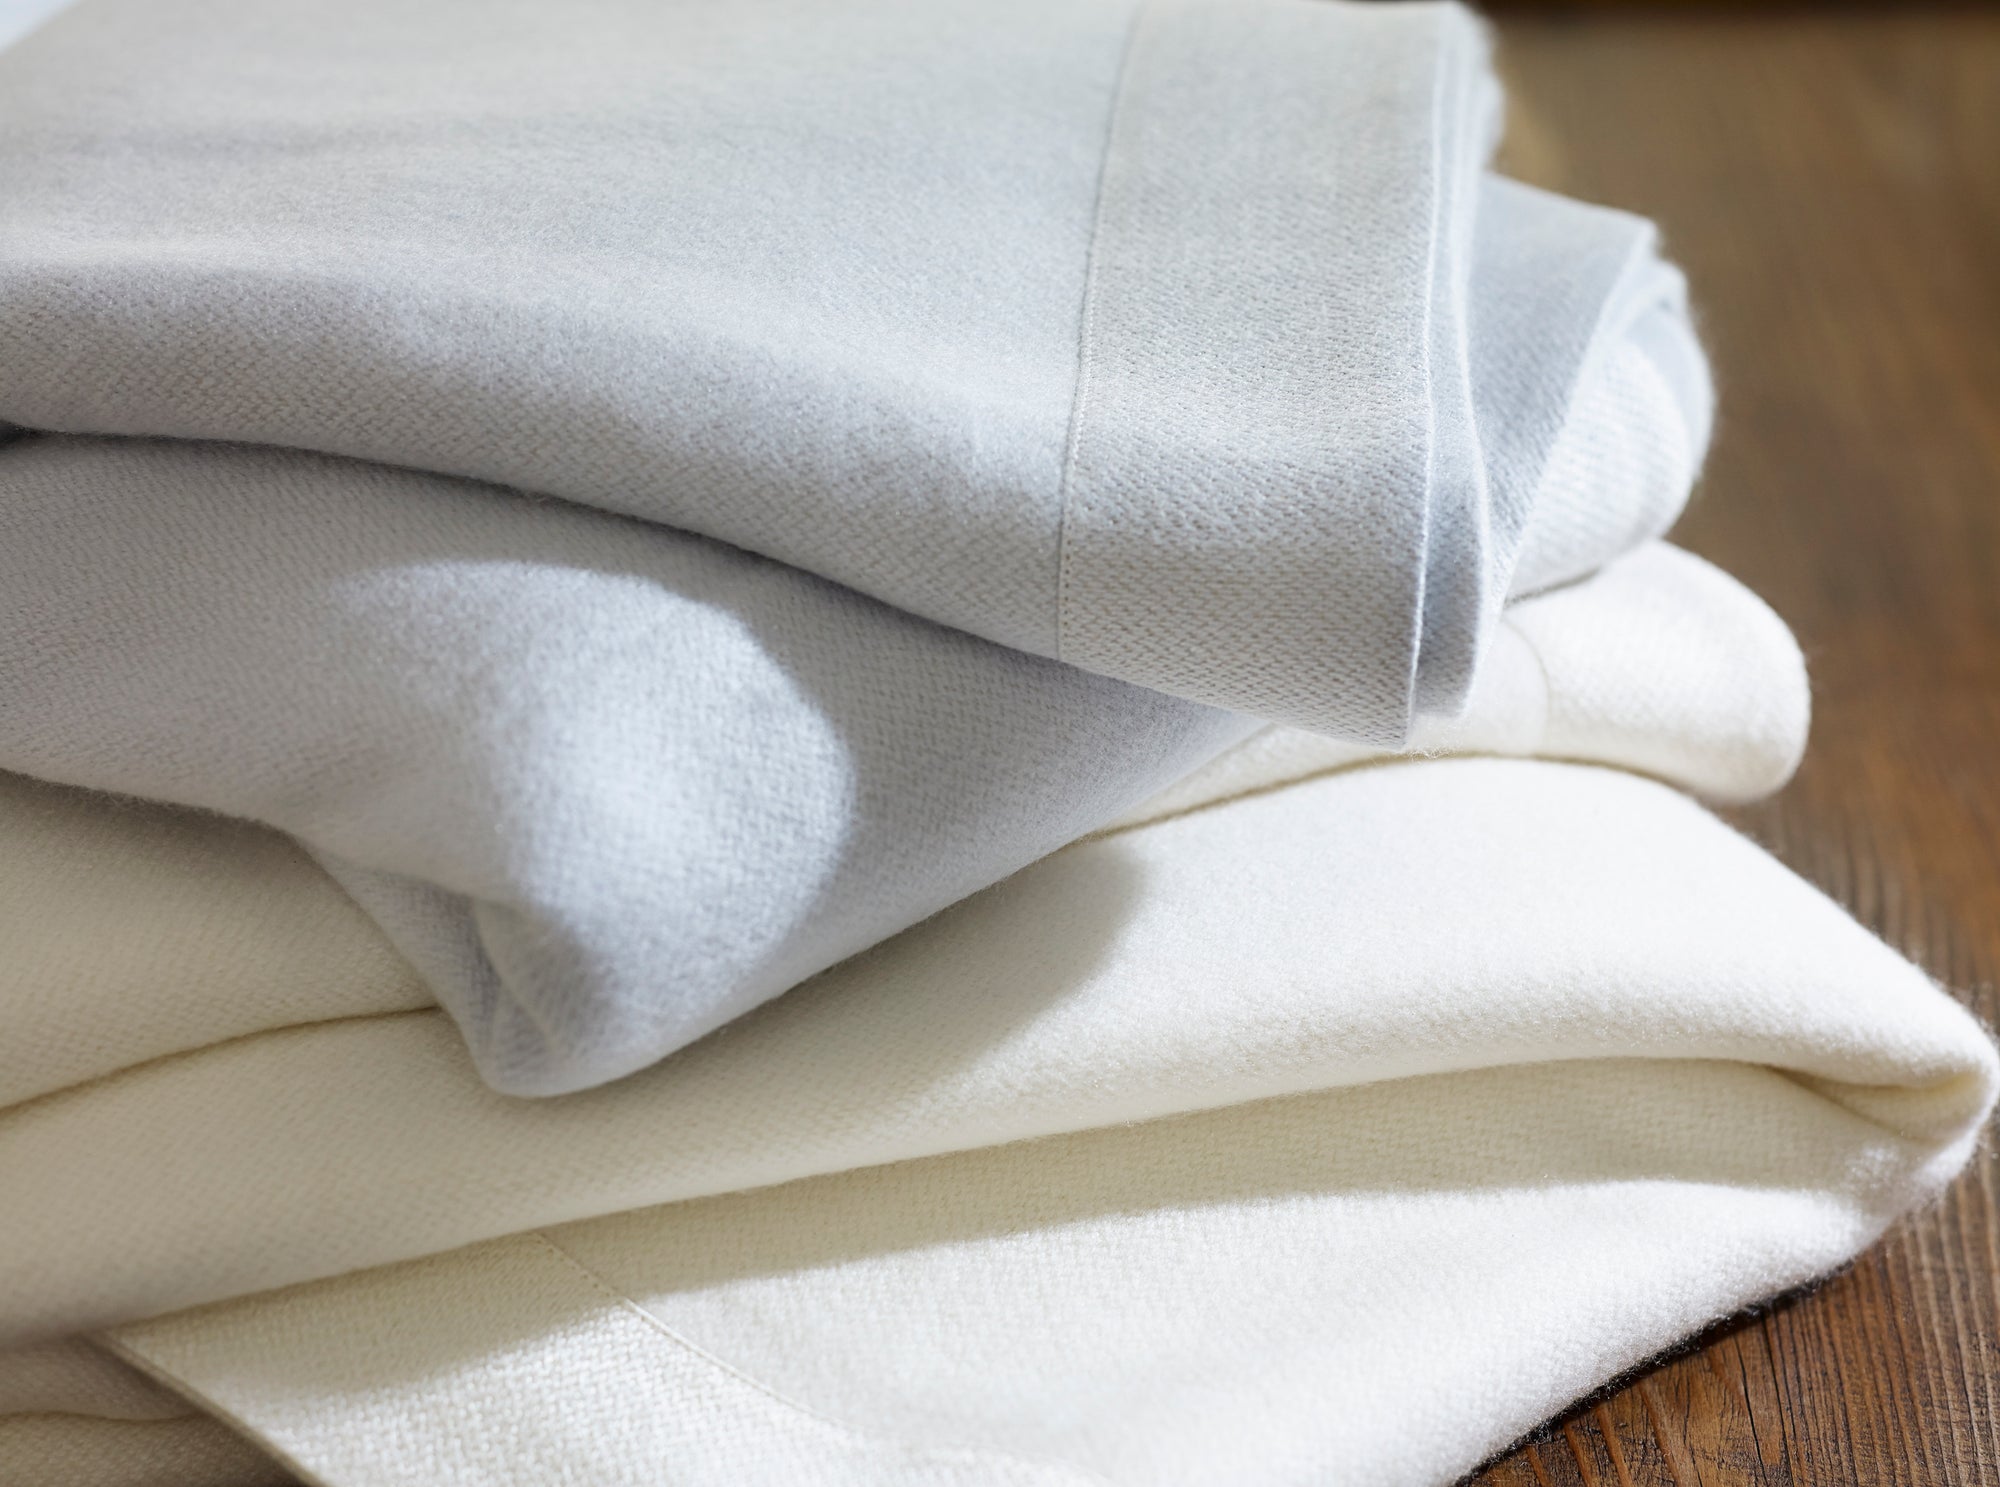 Style and Warmth for Your Bed: A Buyer’s Guide To Luxury Blankets Folded Piled Fine Linens